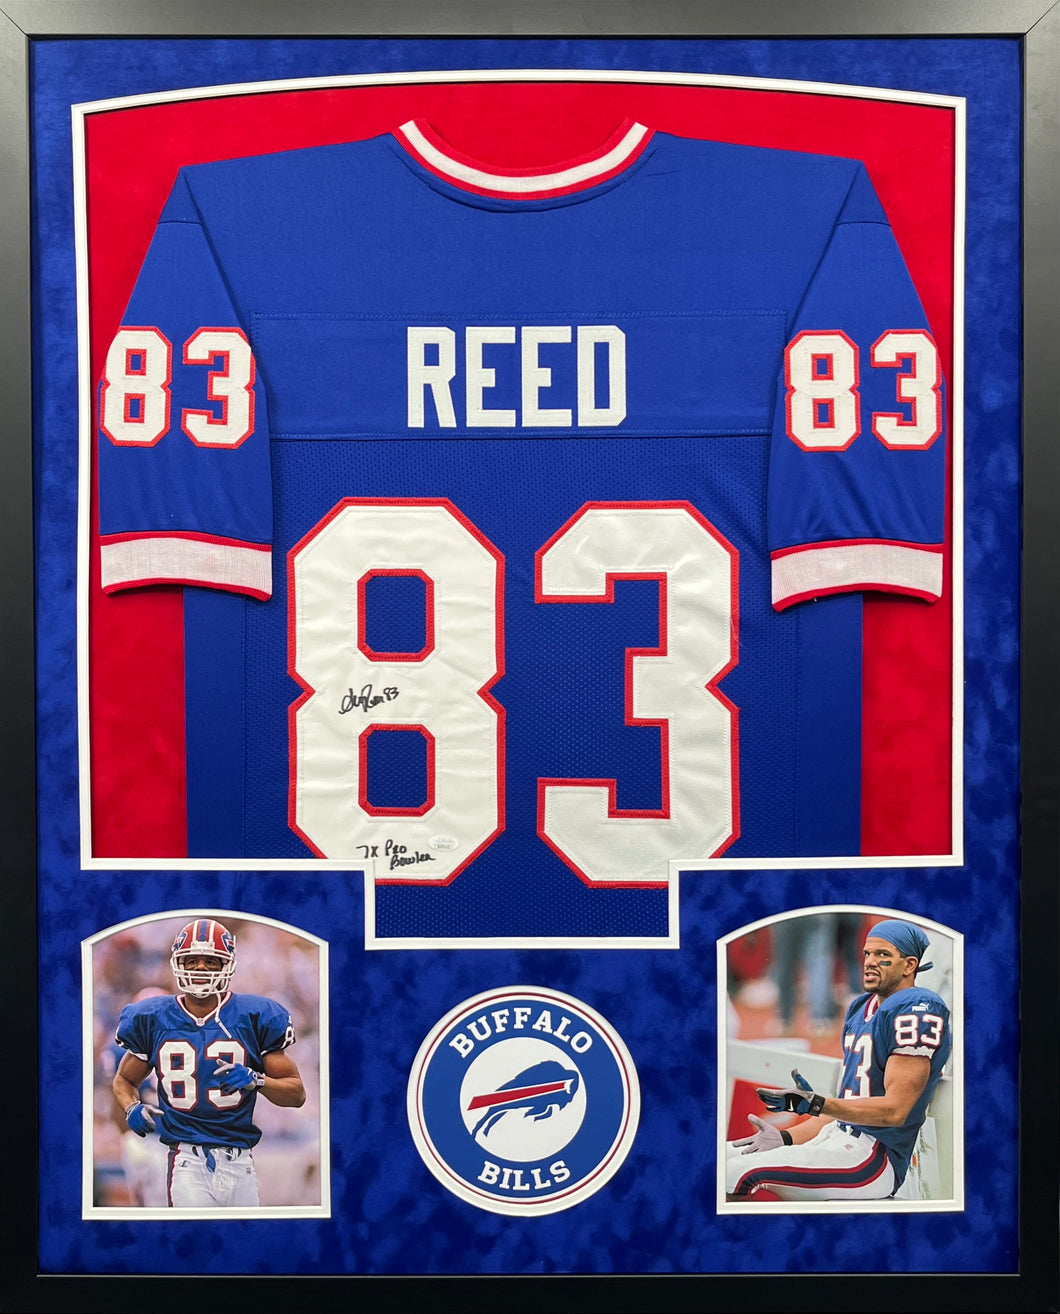 Buffalo Bills Andre Reed Signed Custom Jersey with 7x Pro Bowler Inscription Framed & Suede Matted with JSA COA